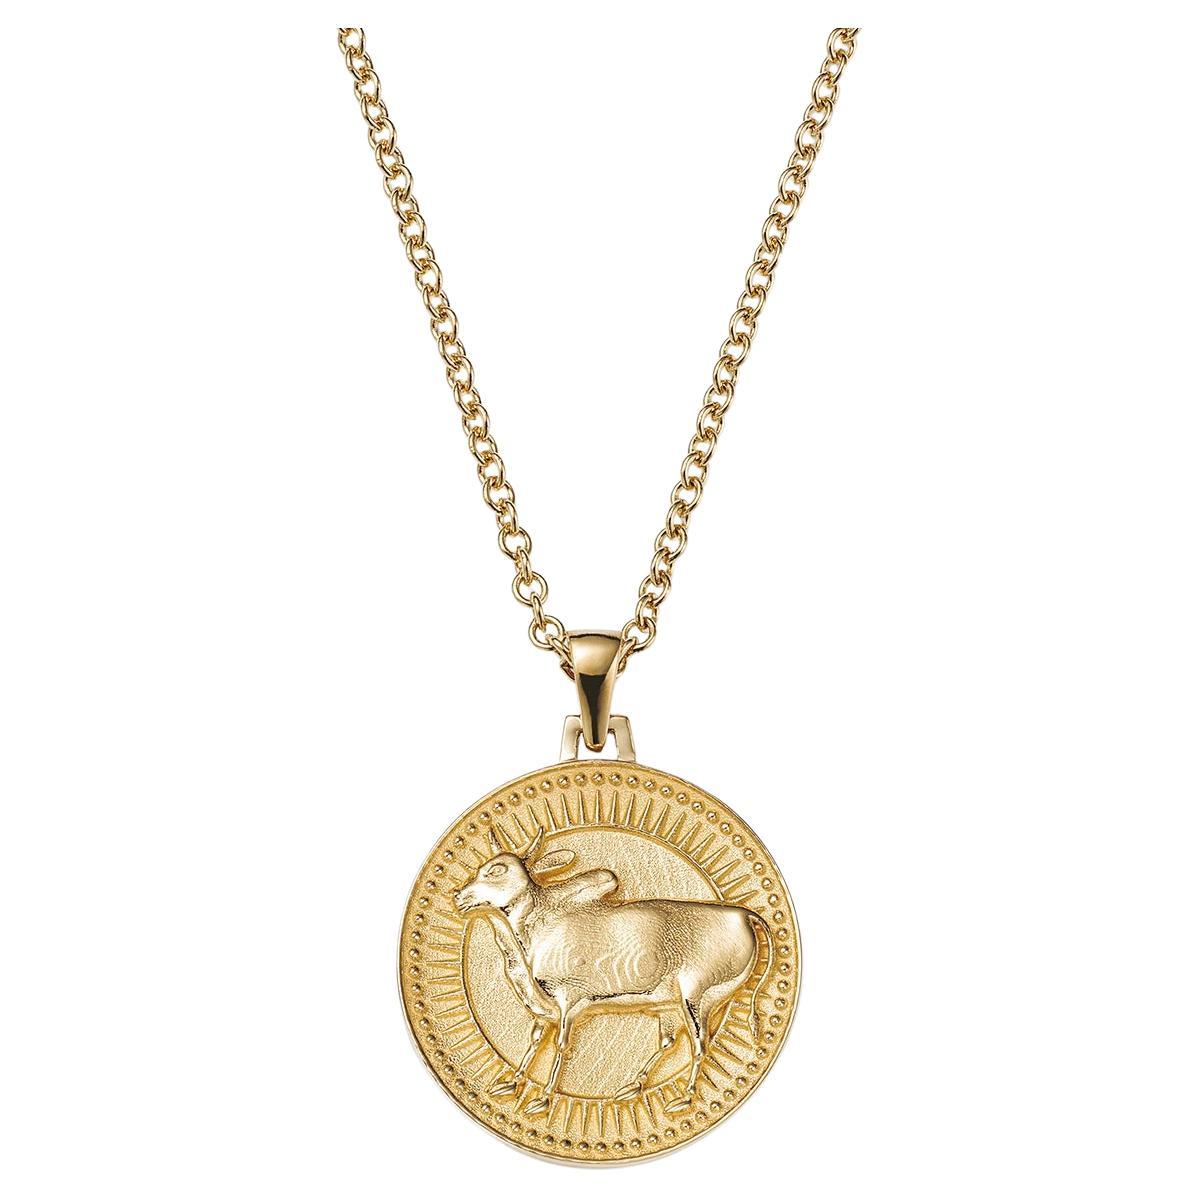 Taurus Zodiac Pendant Necklace 18kt Fairmined Ecological Gold For Sale